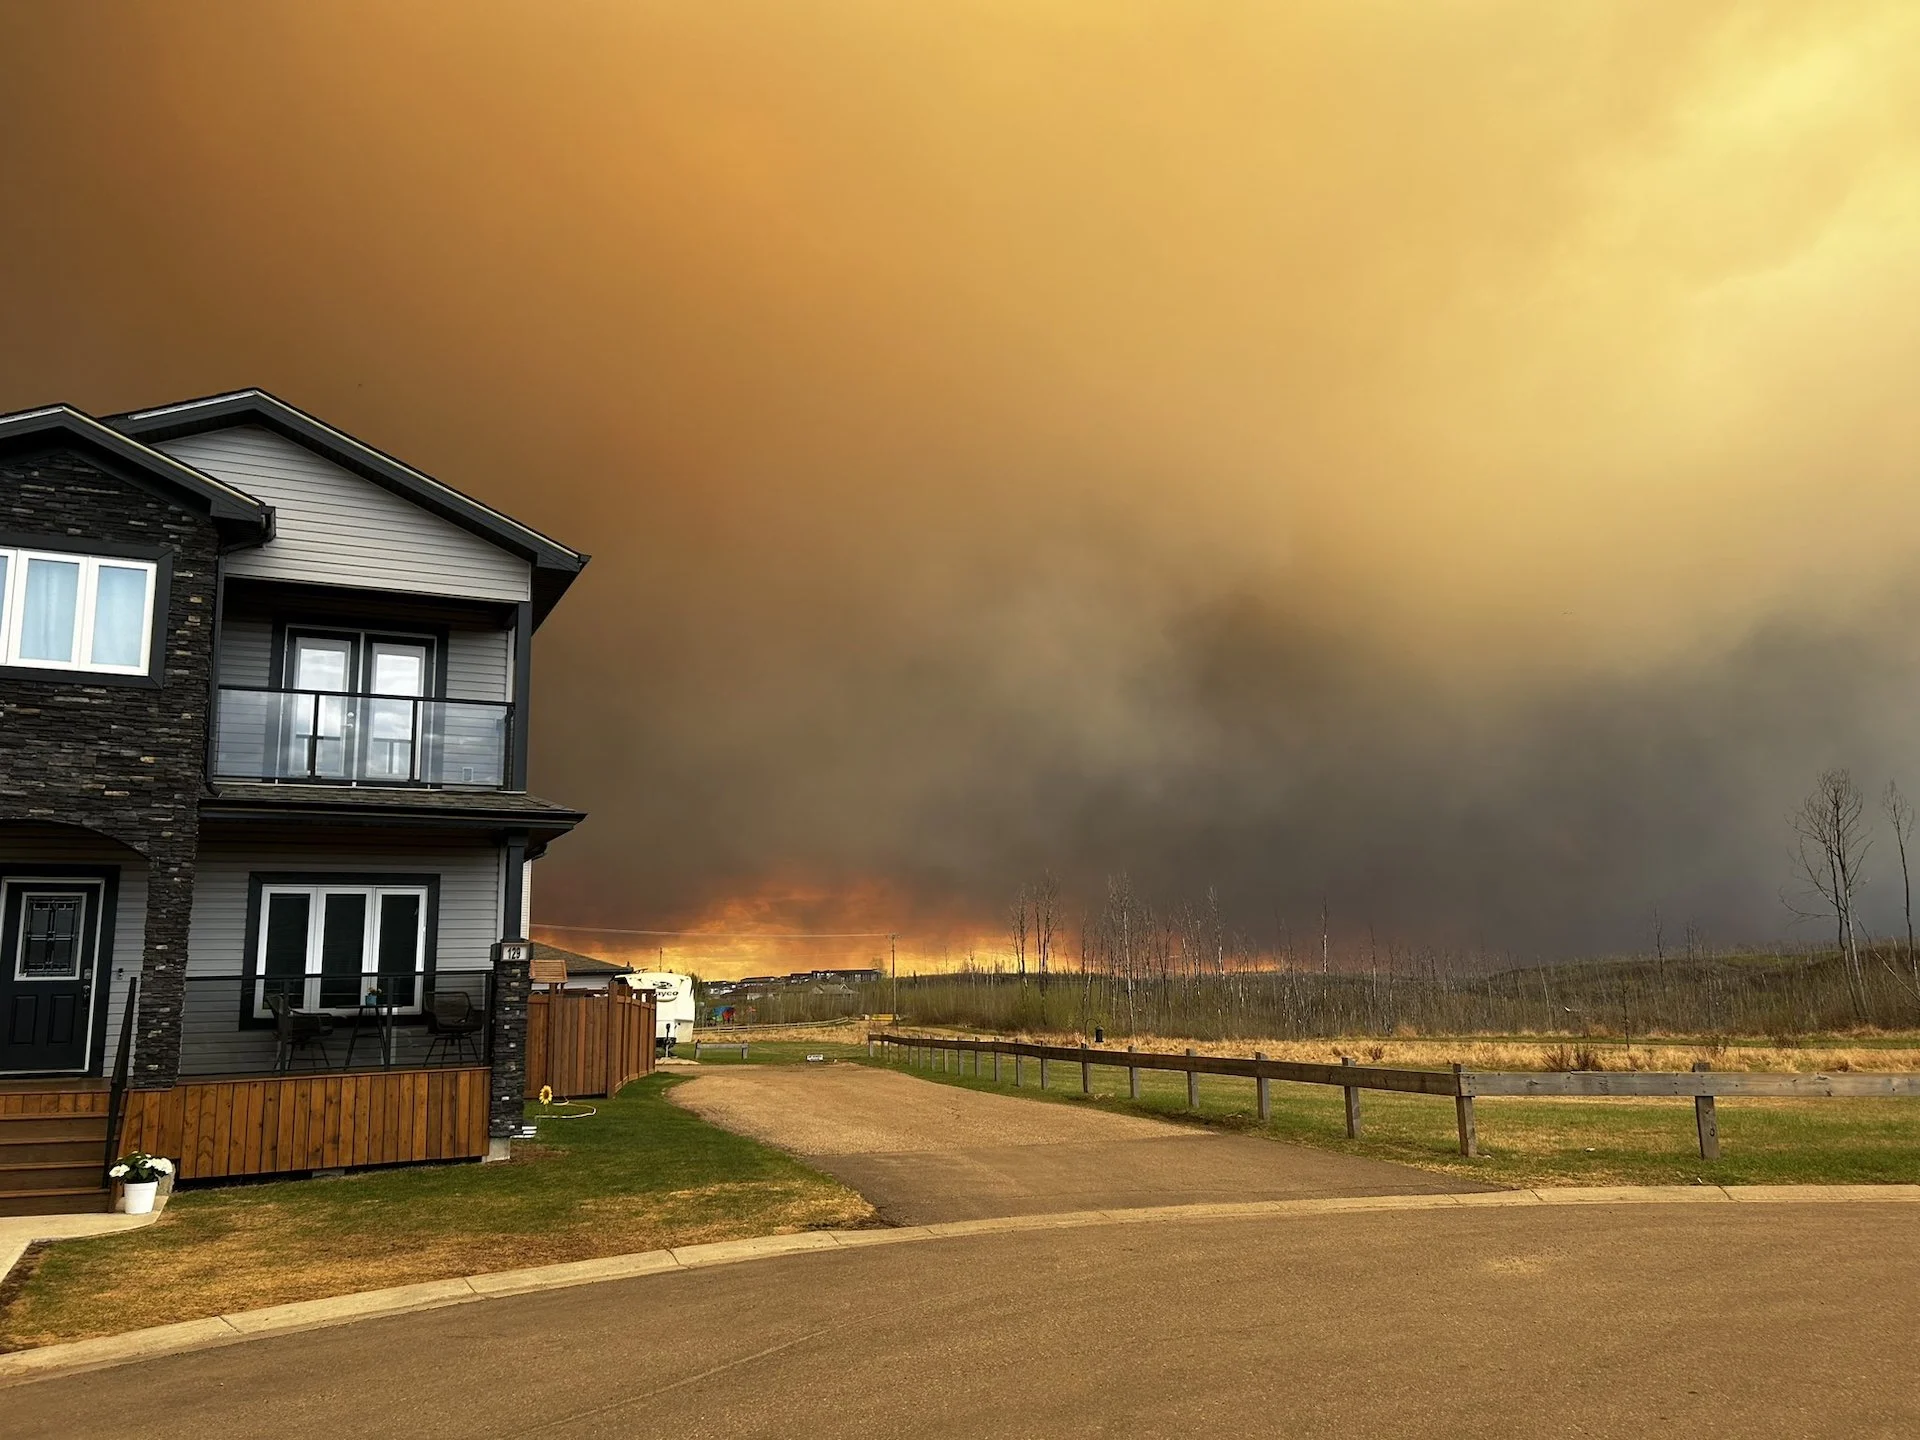 Several communities near Fort McMurray are on an evacuation order as a wildfire gets dangerously close to the community. Latest, here